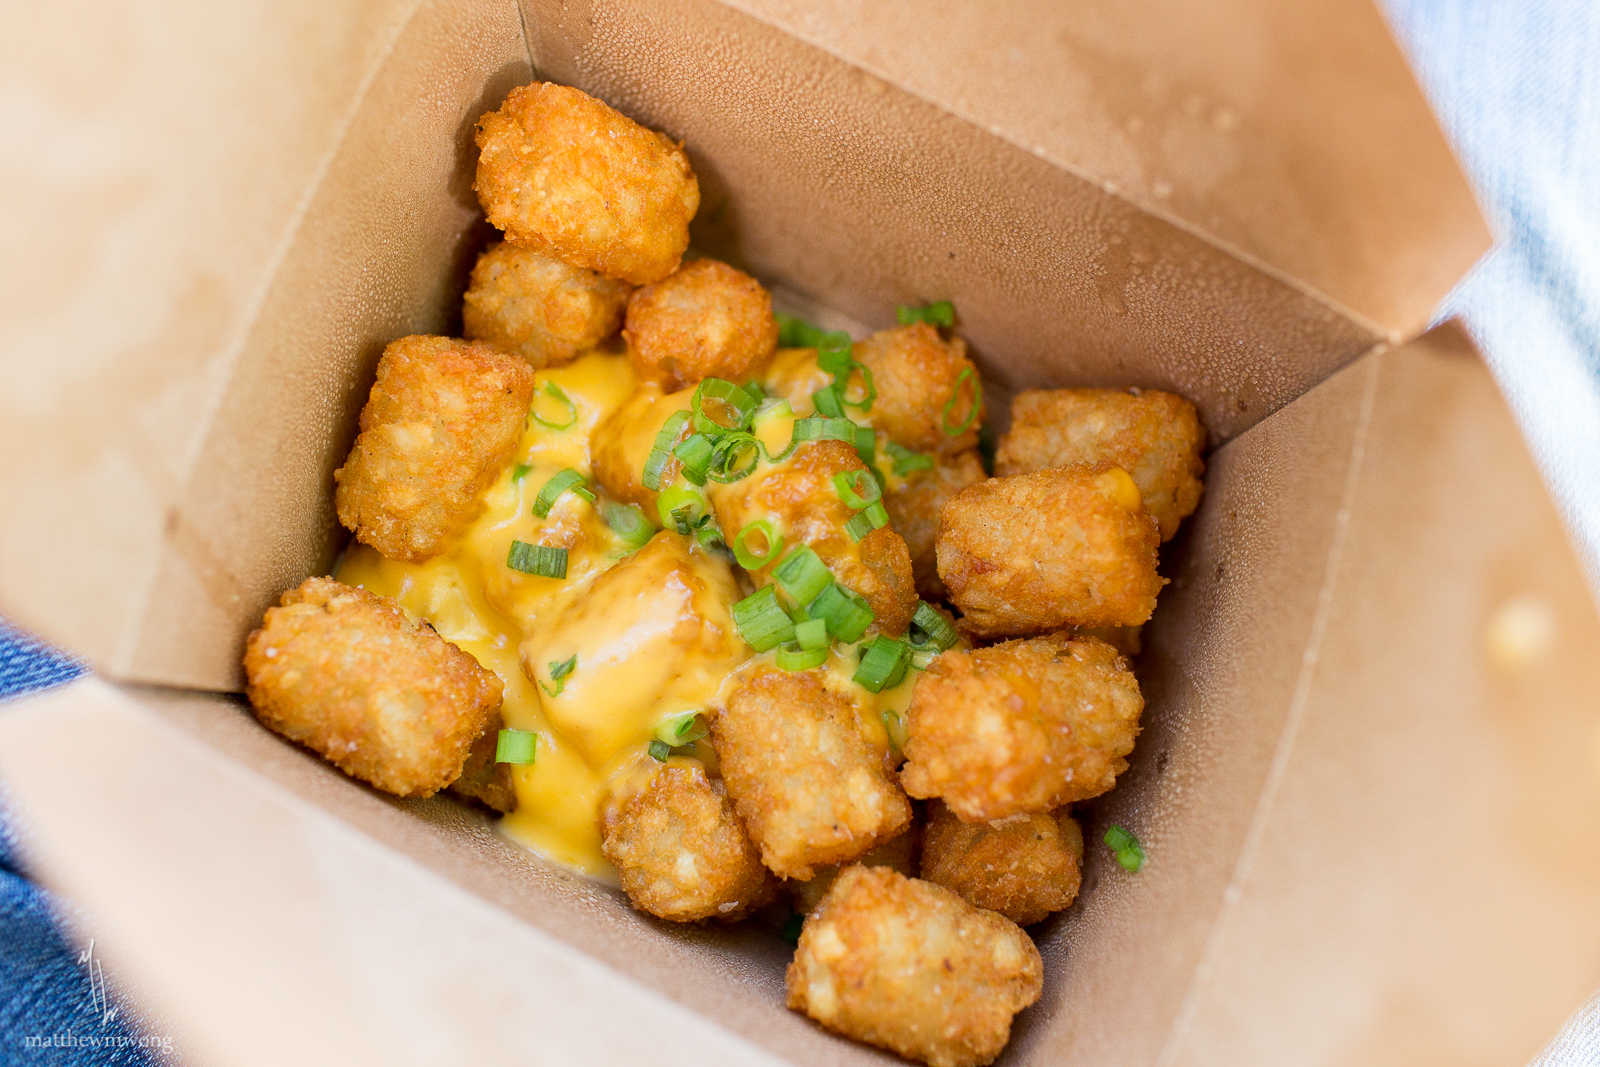 Green Onion and Cheddar Tater Tots